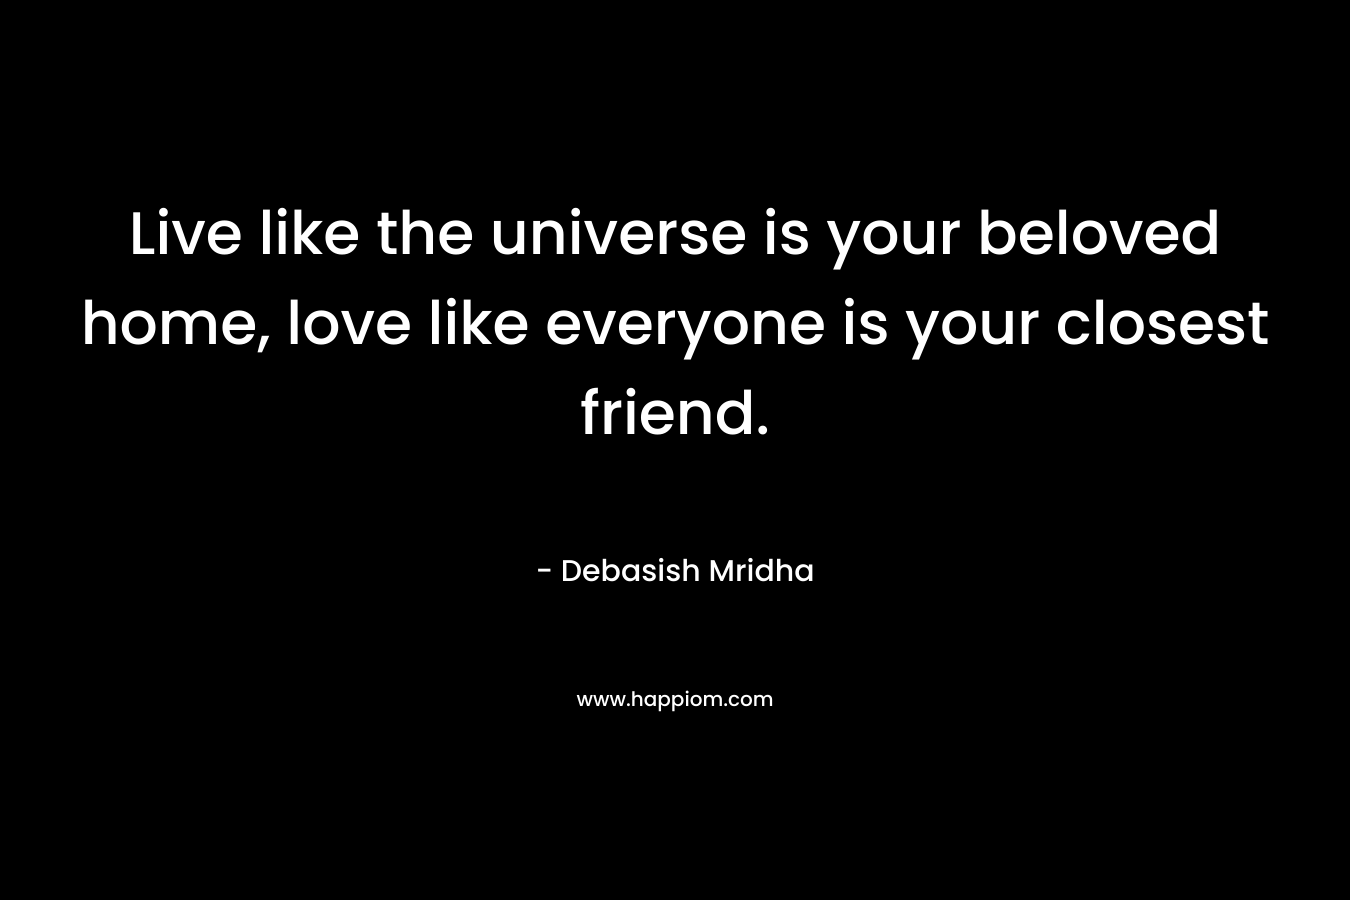 Live like the universe is your beloved home, love like everyone is your closest friend.